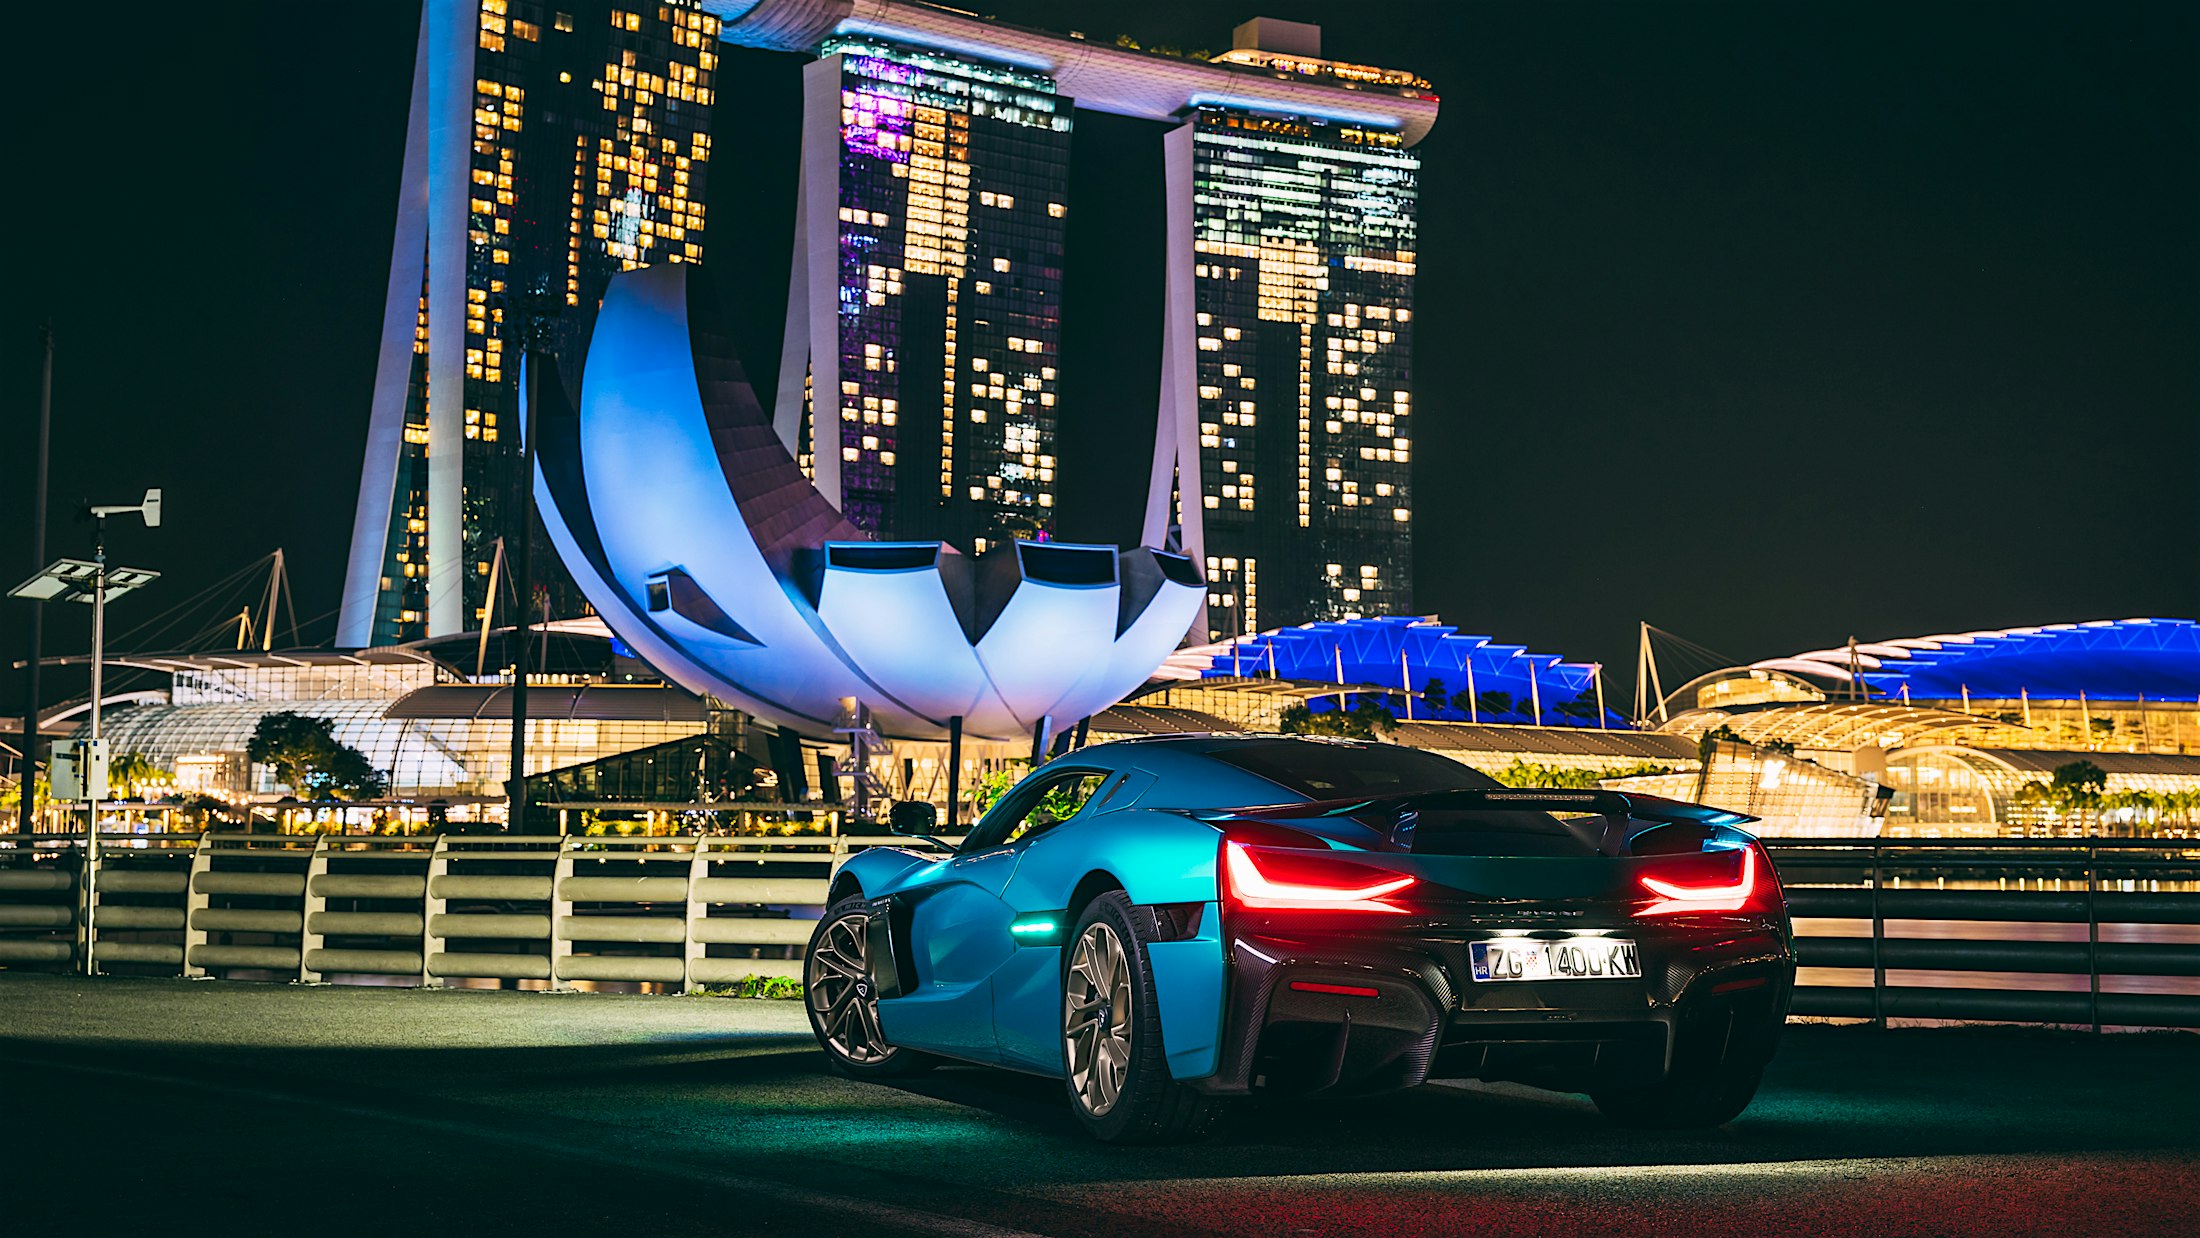 Rimac Automobili partners with Wearnes Automotive to launch the Rimac Nevera in Singapore